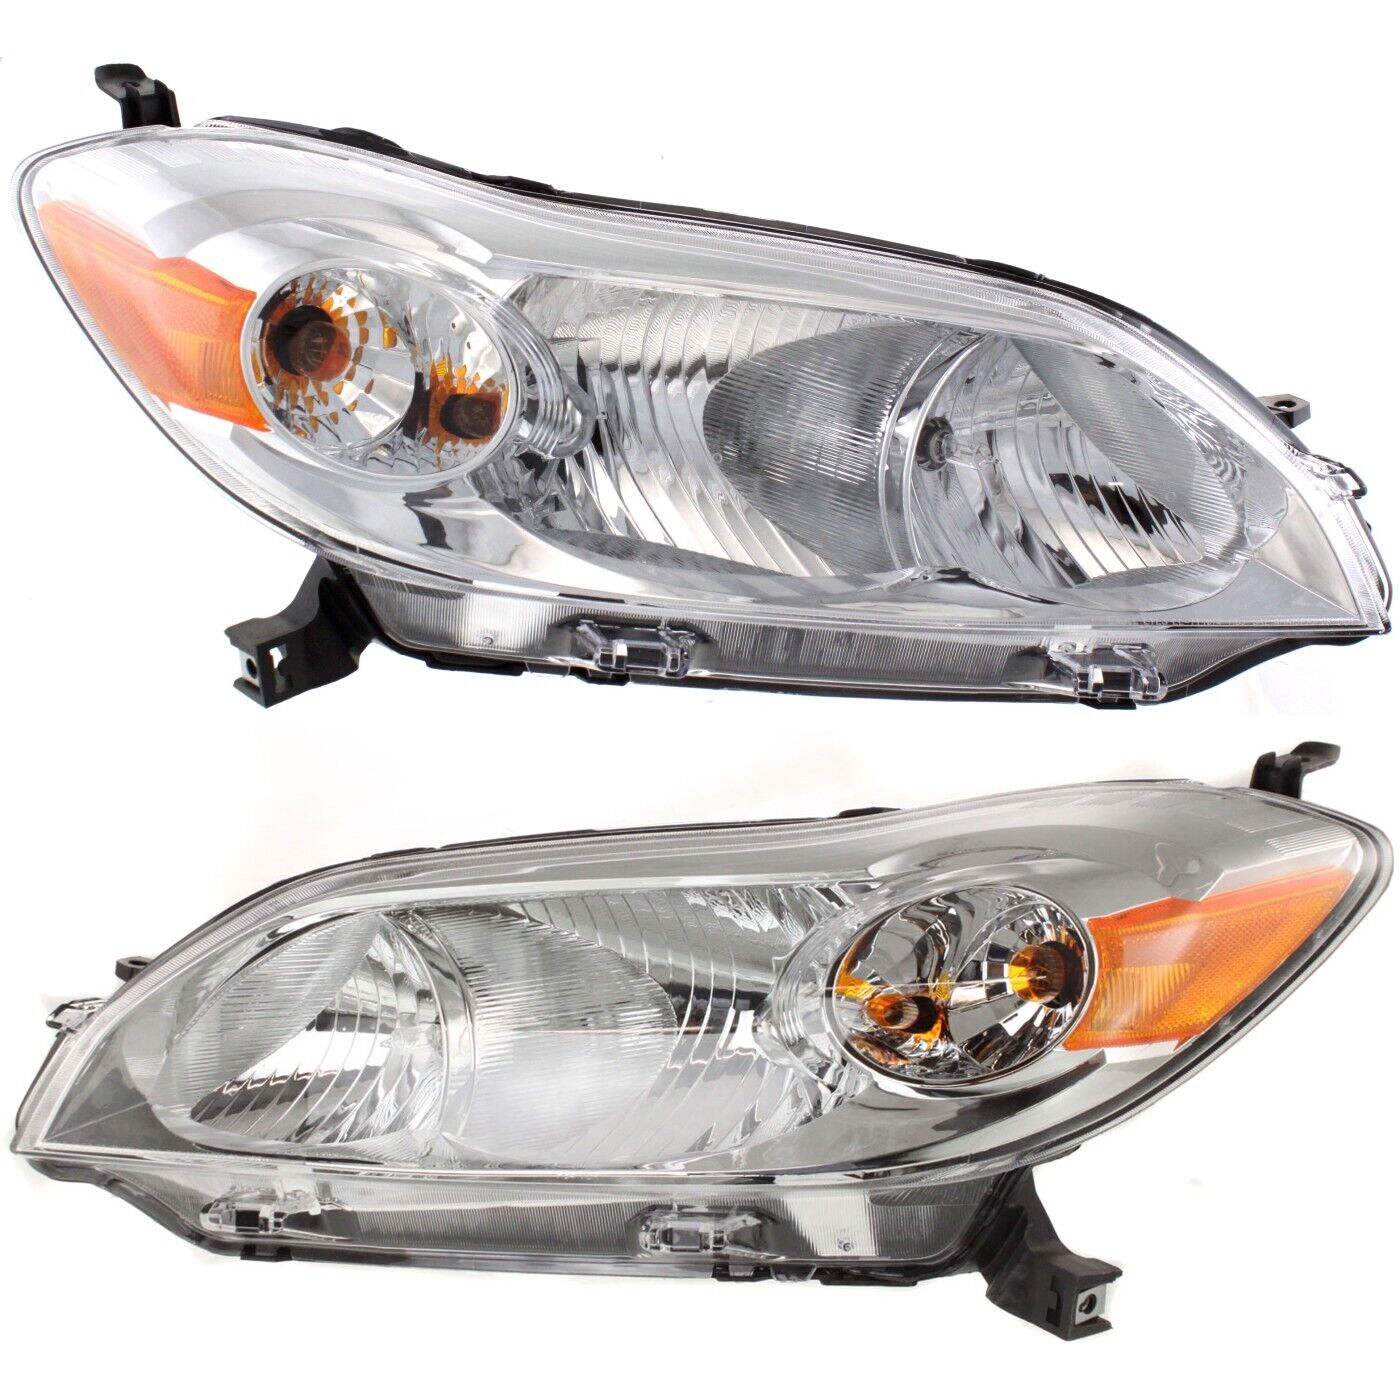 Headlight Set For 2009-2014 Toyota Matrix Left and Right Headlamp With Bulb 2Pc